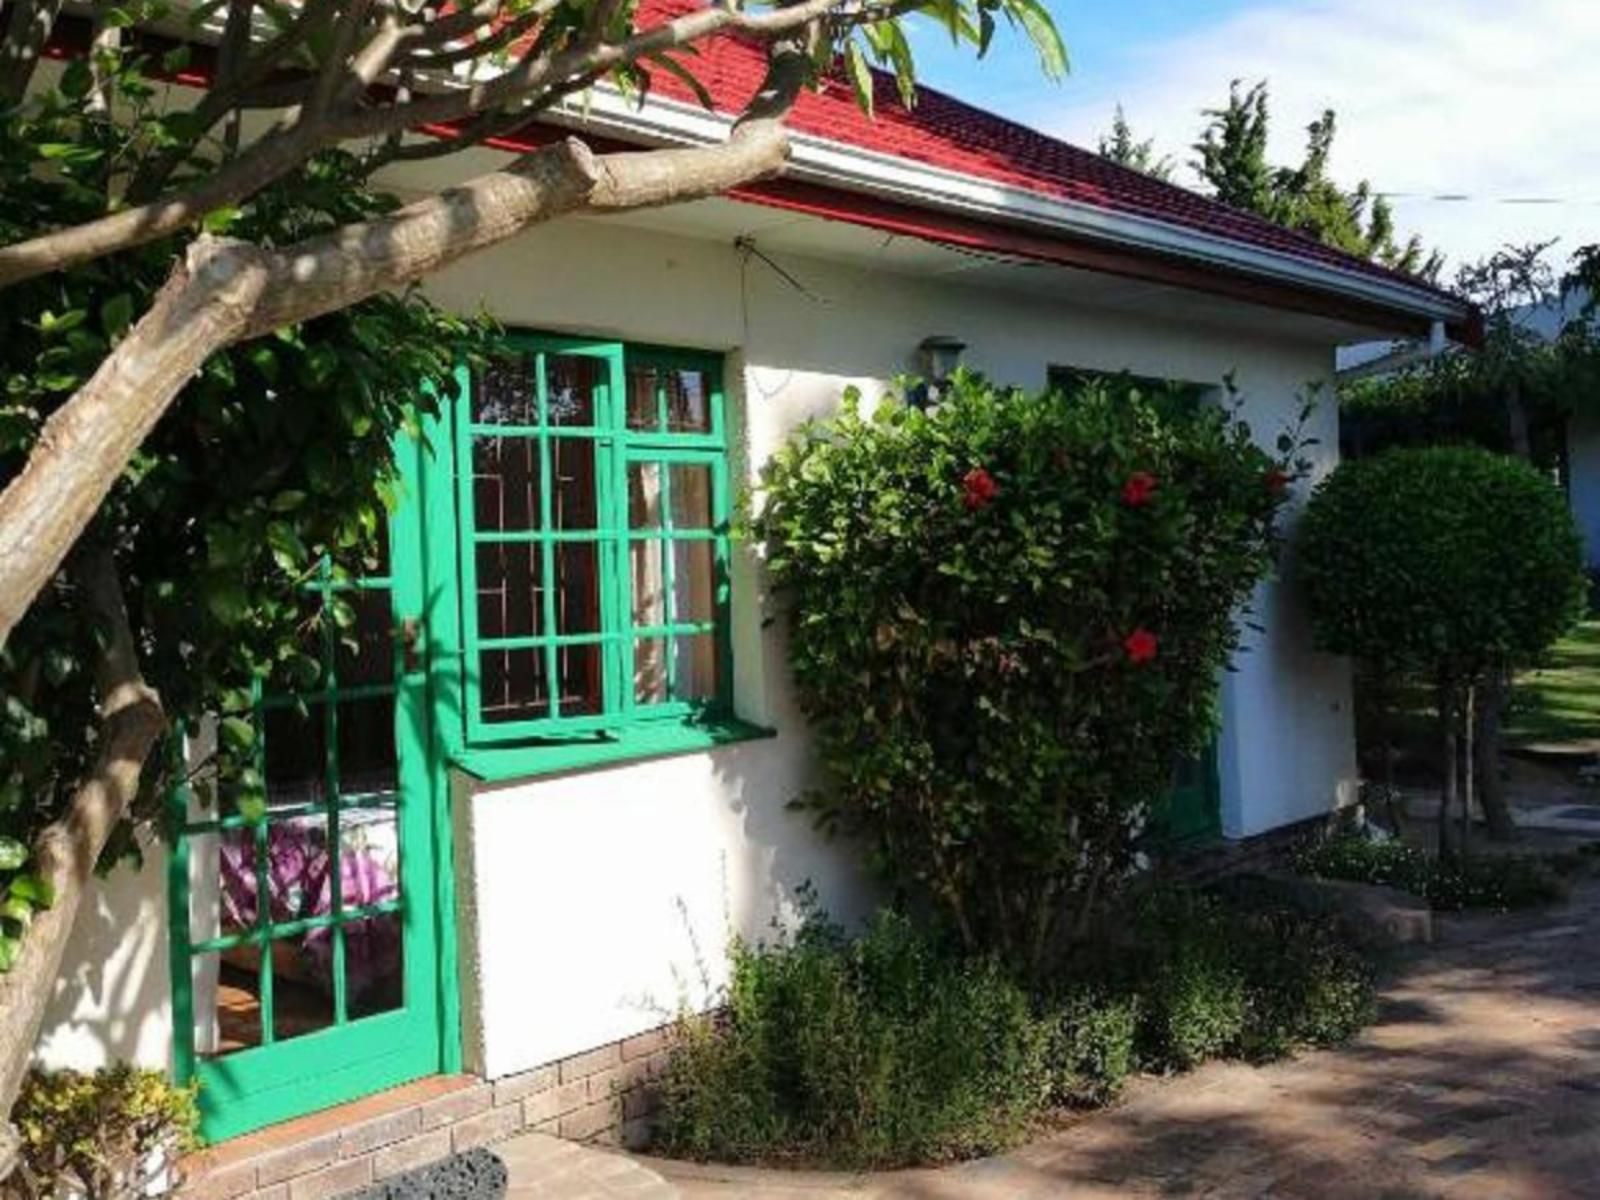 Wine Route 44 Guesthouse Helena Heights Somerset West Western Cape South Africa House, Building, Architecture, Plant, Nature, Window, Garden